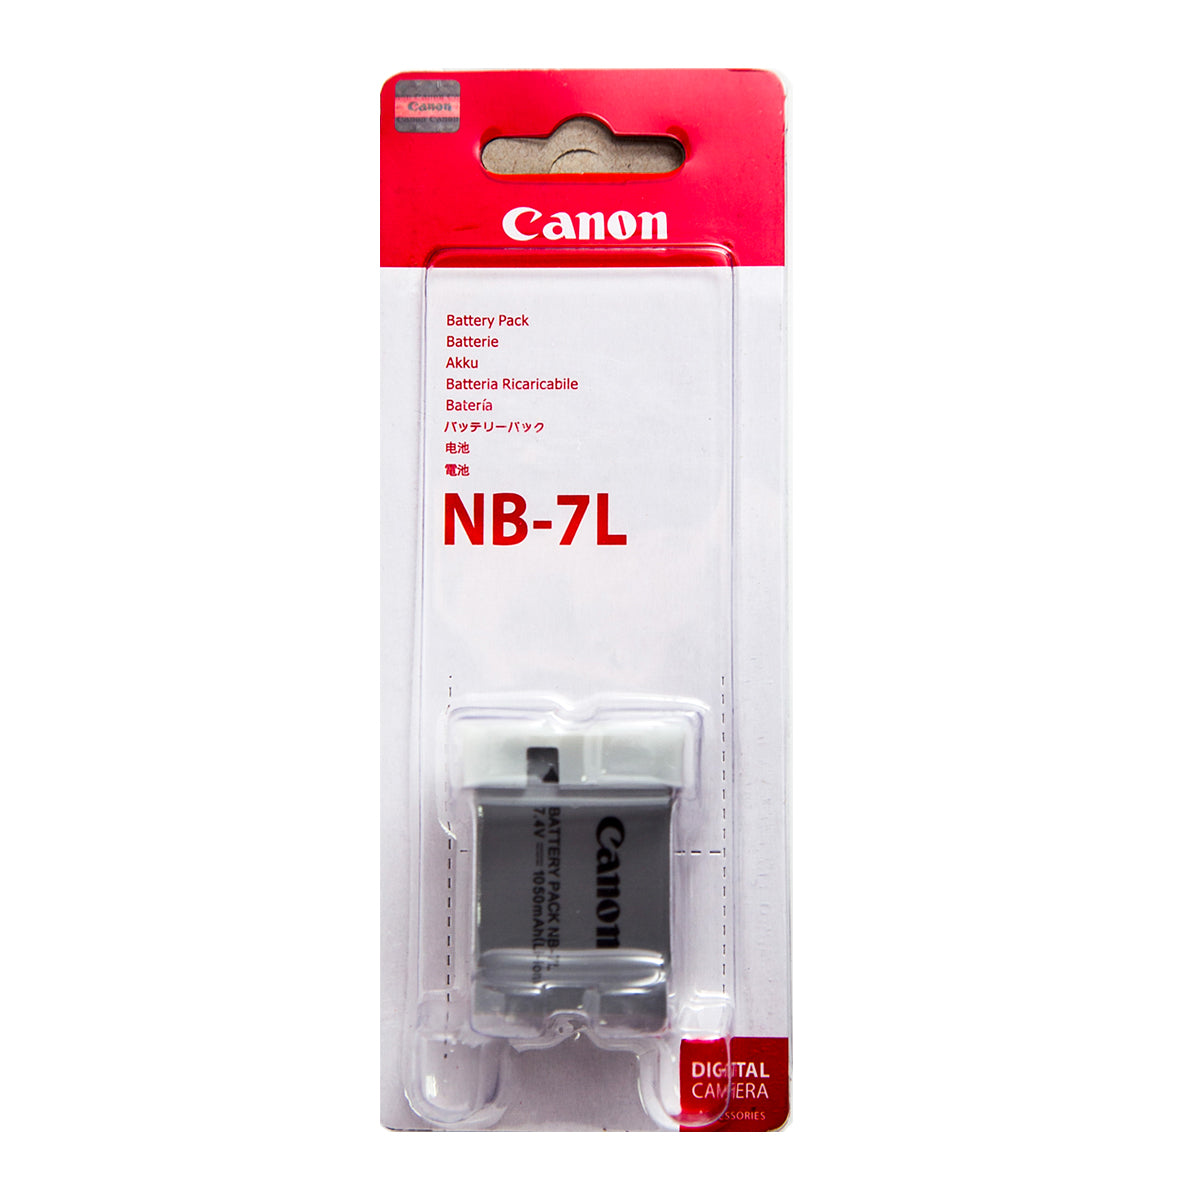 Pxel Canon NB-7L Replacement Lithium-Ion Rechargeable Battery 7.4V 1050mAh for Powershot G10/11/12 SX30 IS Digital Cameras (Class A)